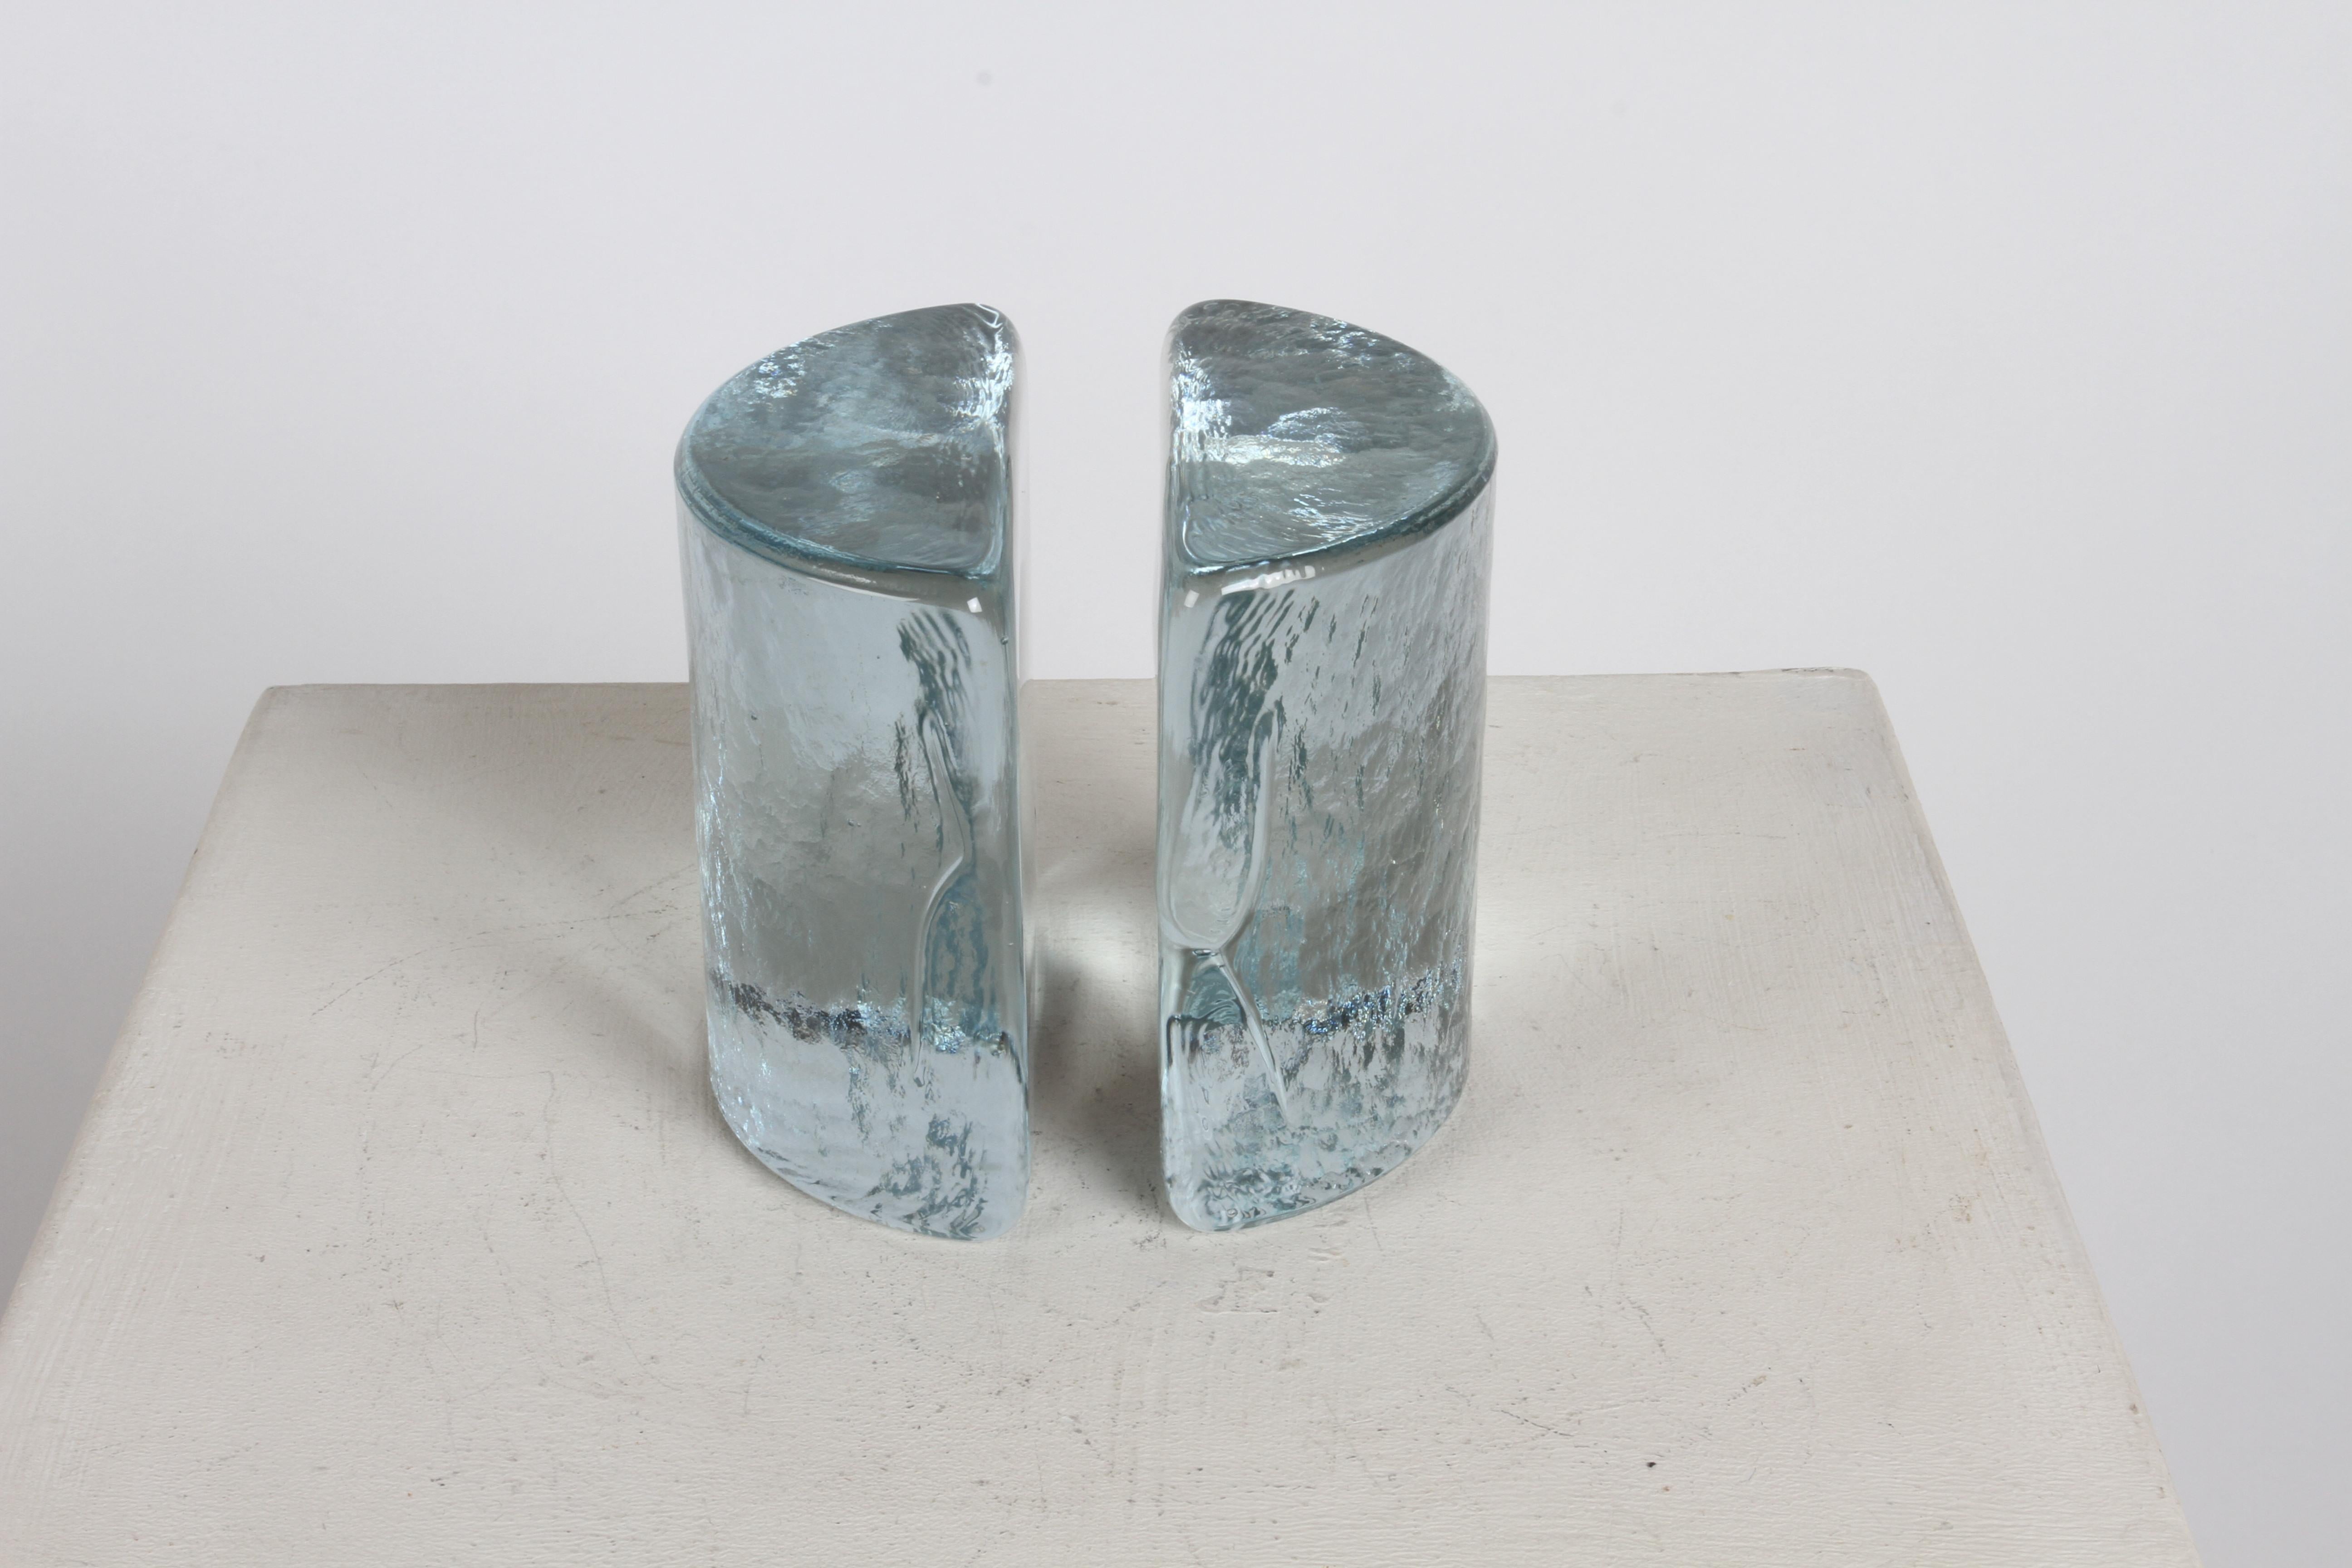 Pair of Wayne Husted designed clear half glass bookends for Blenko, circa 1960s. In fine condition, no damage. Original Label, possible model # 434.